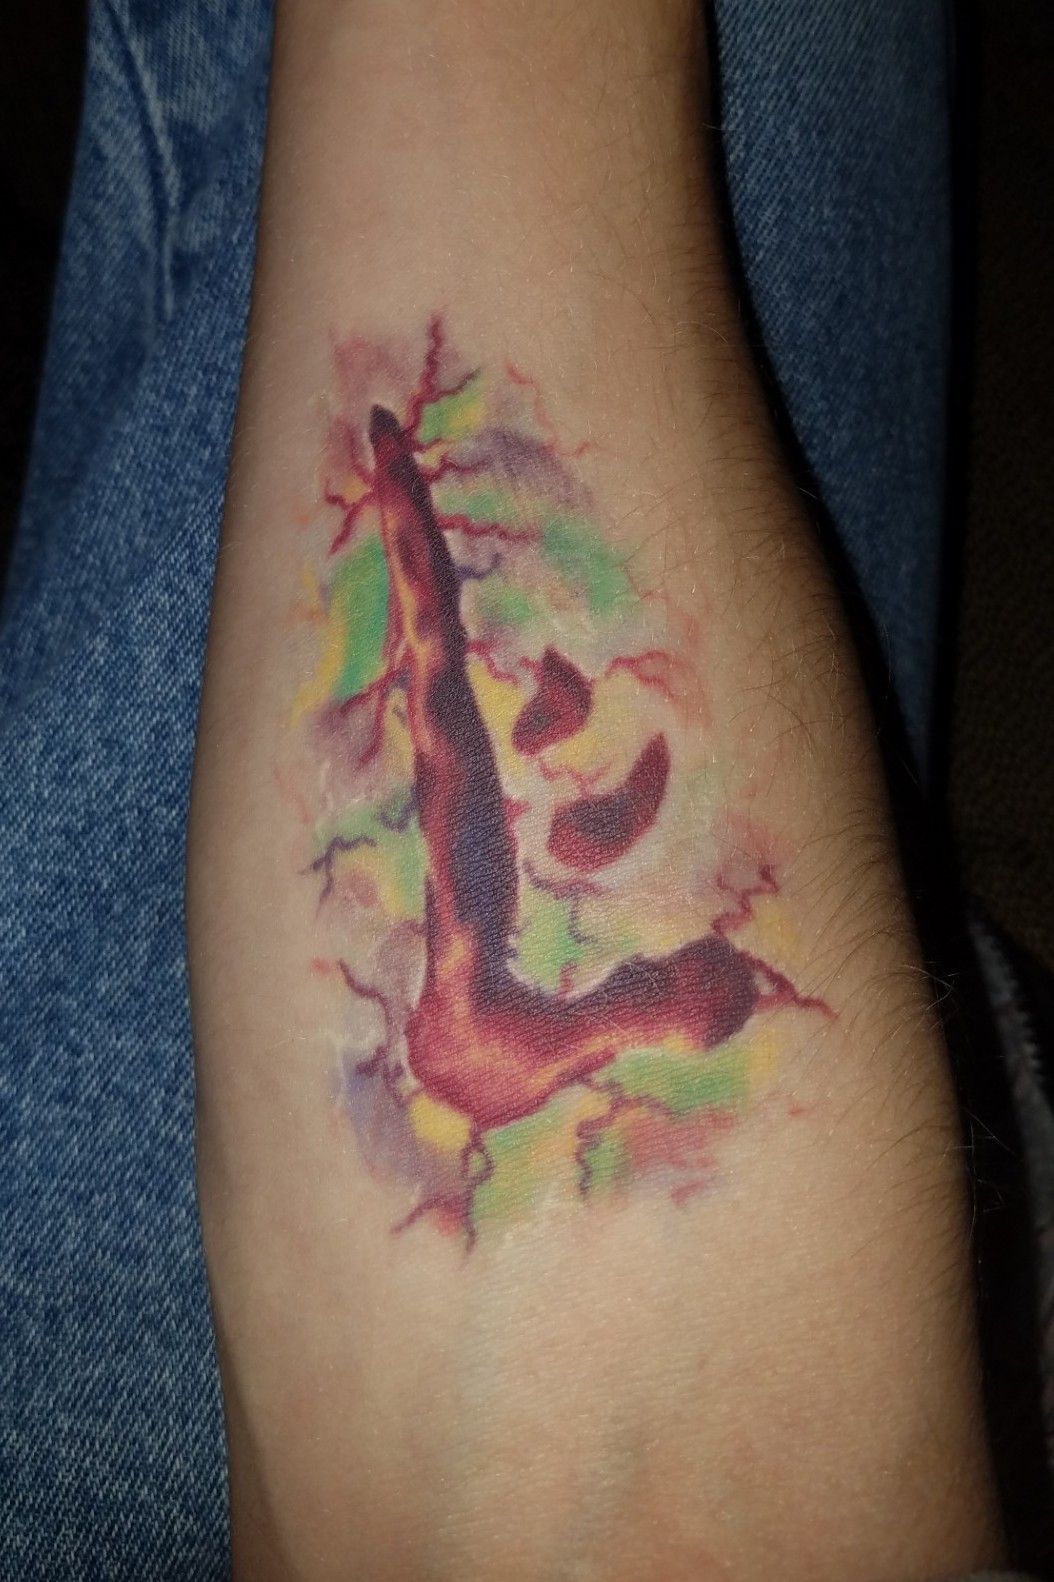 Since there was post earlier heres my Mark of Cain tattoo  My skin  doesnt hold red very well  rSupernatural